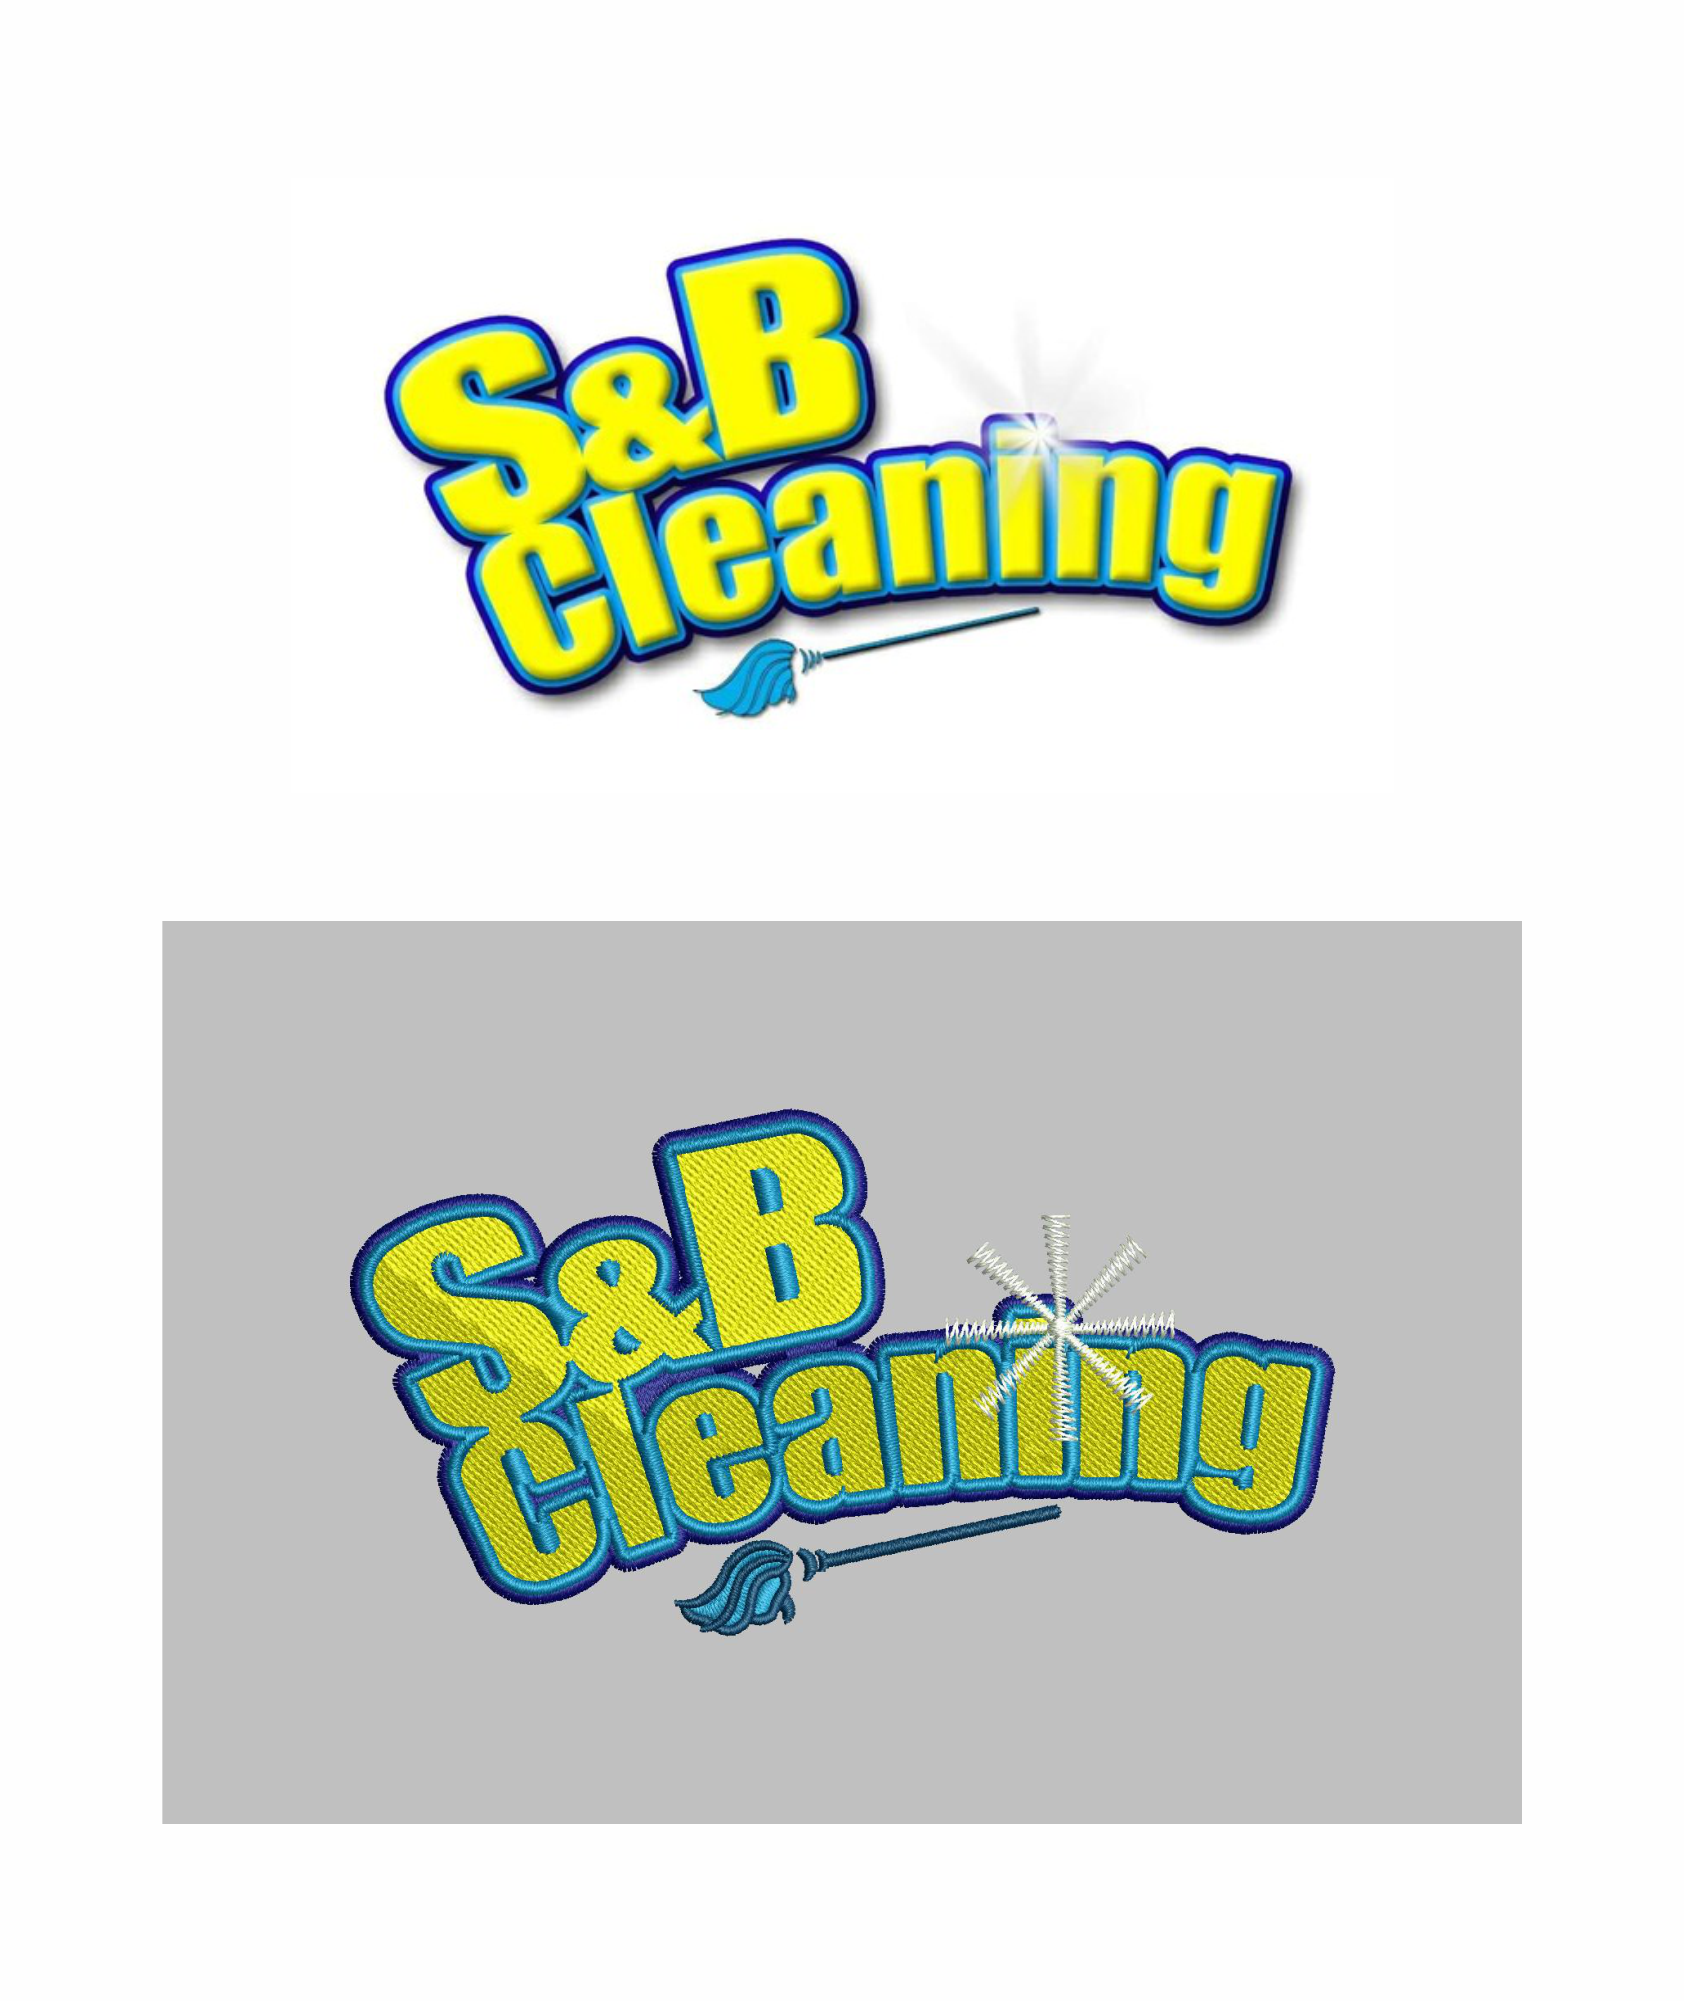 s_and_b_cleaning.png